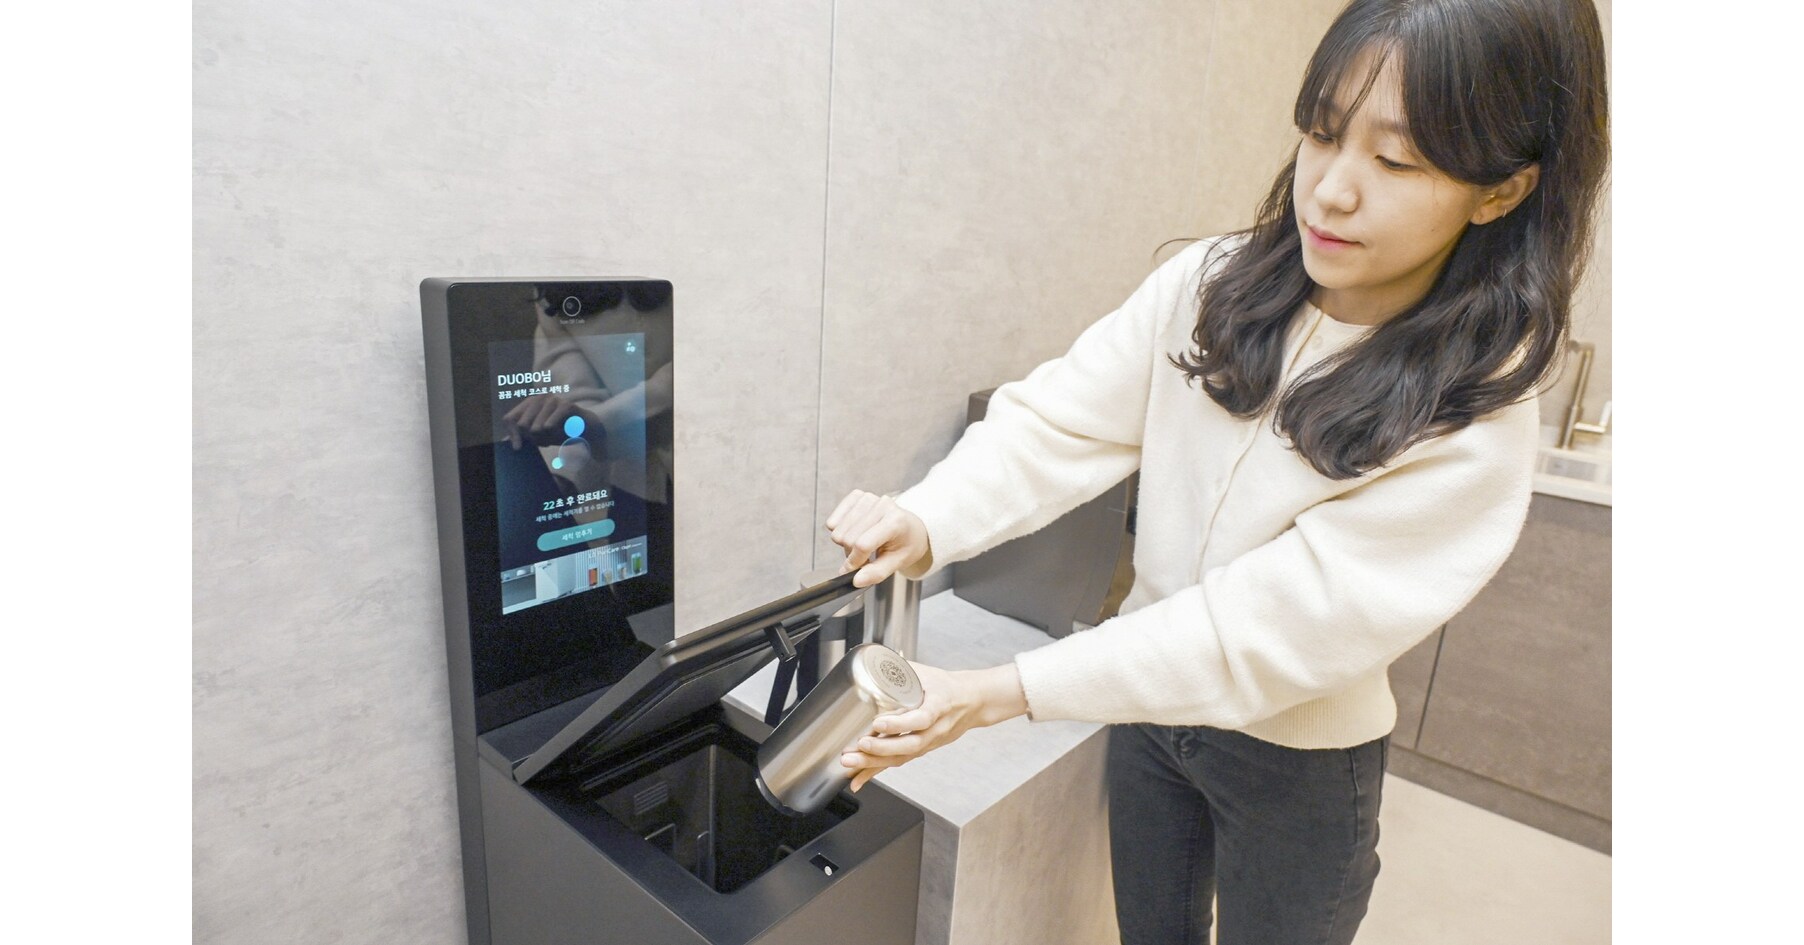 LG STYLER INTRODUCES NEW ERA IN CLOTHING CARE MANAGEMENT AT CES 2024, by  The Good Life, Jan, 2024